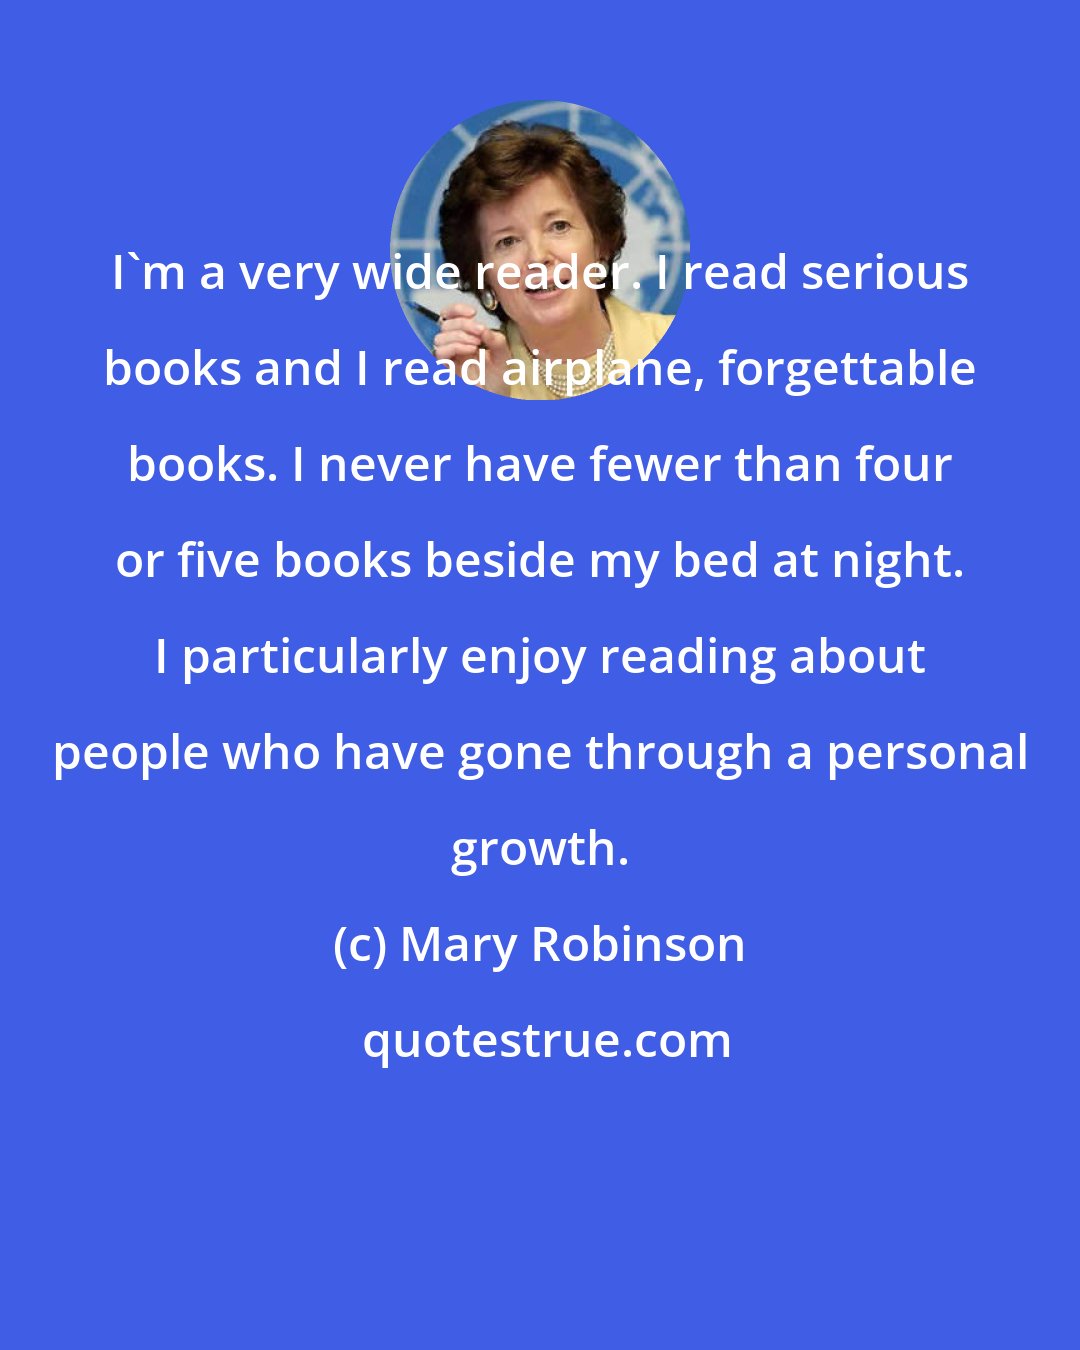 Mary Robinson: I'm a very wide reader. I read serious books and I read airplane, forgettable books. I never have fewer than four or five books beside my bed at night. I particularly enjoy reading about people who have gone through a personal growth.